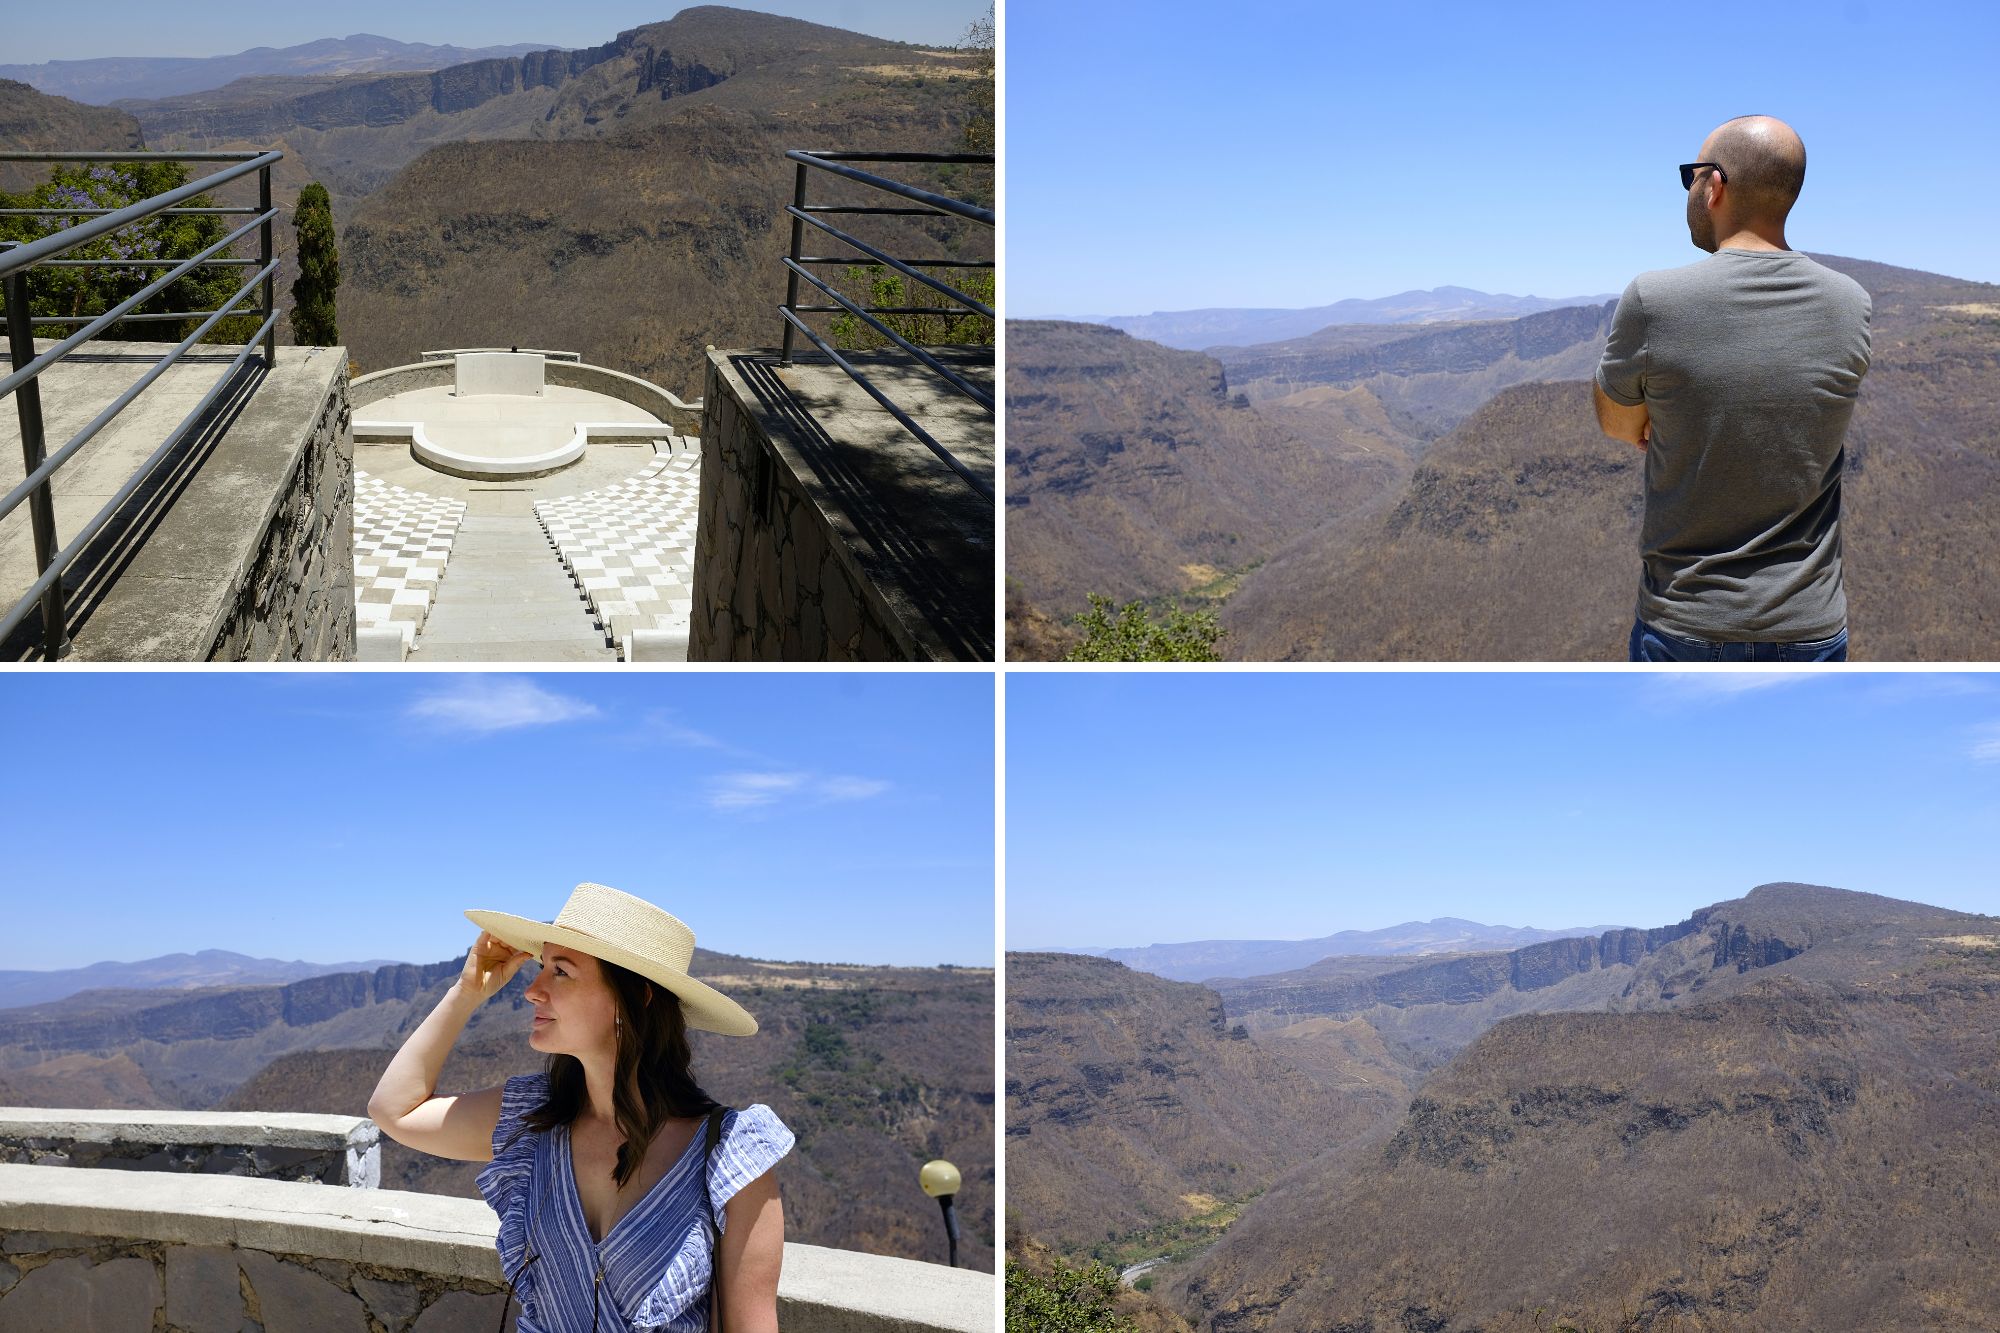 Collage of images looking out over Barranca de Huentitán 